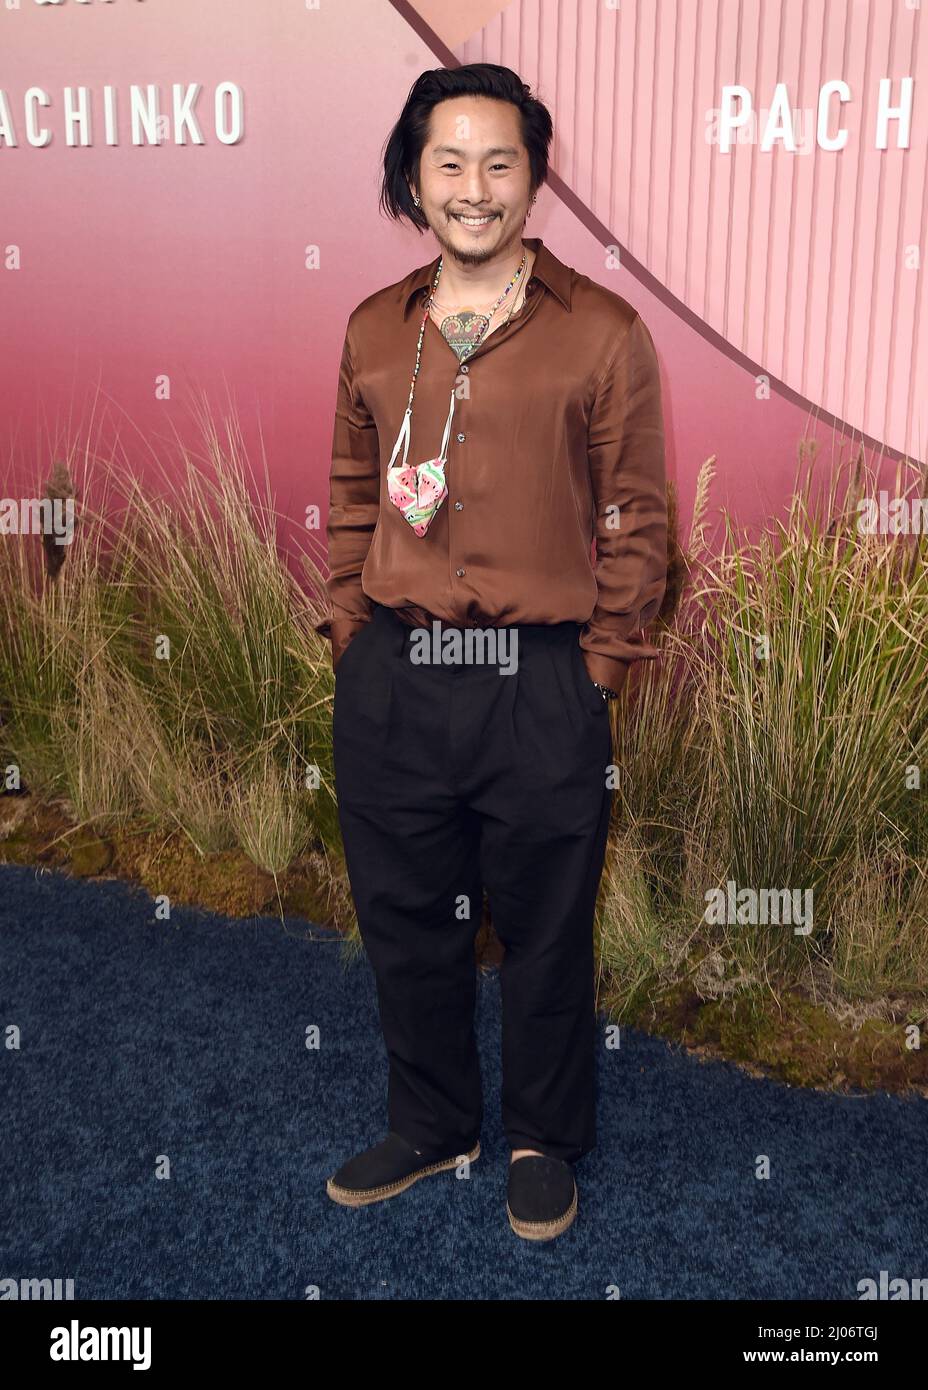 Los Angeles, USA. 16th Mar, 2022. Executive Producer/Director Justin Chon on the red carpet at Apple's "Pachinko" Global Premiere Event held at The Academy Museum in Los Angeles, CA on March 16, 2022. (Photo By Scott Kirkland/Sipa USA) Credit: Sipa USA/Alamy Live News Stock Photo